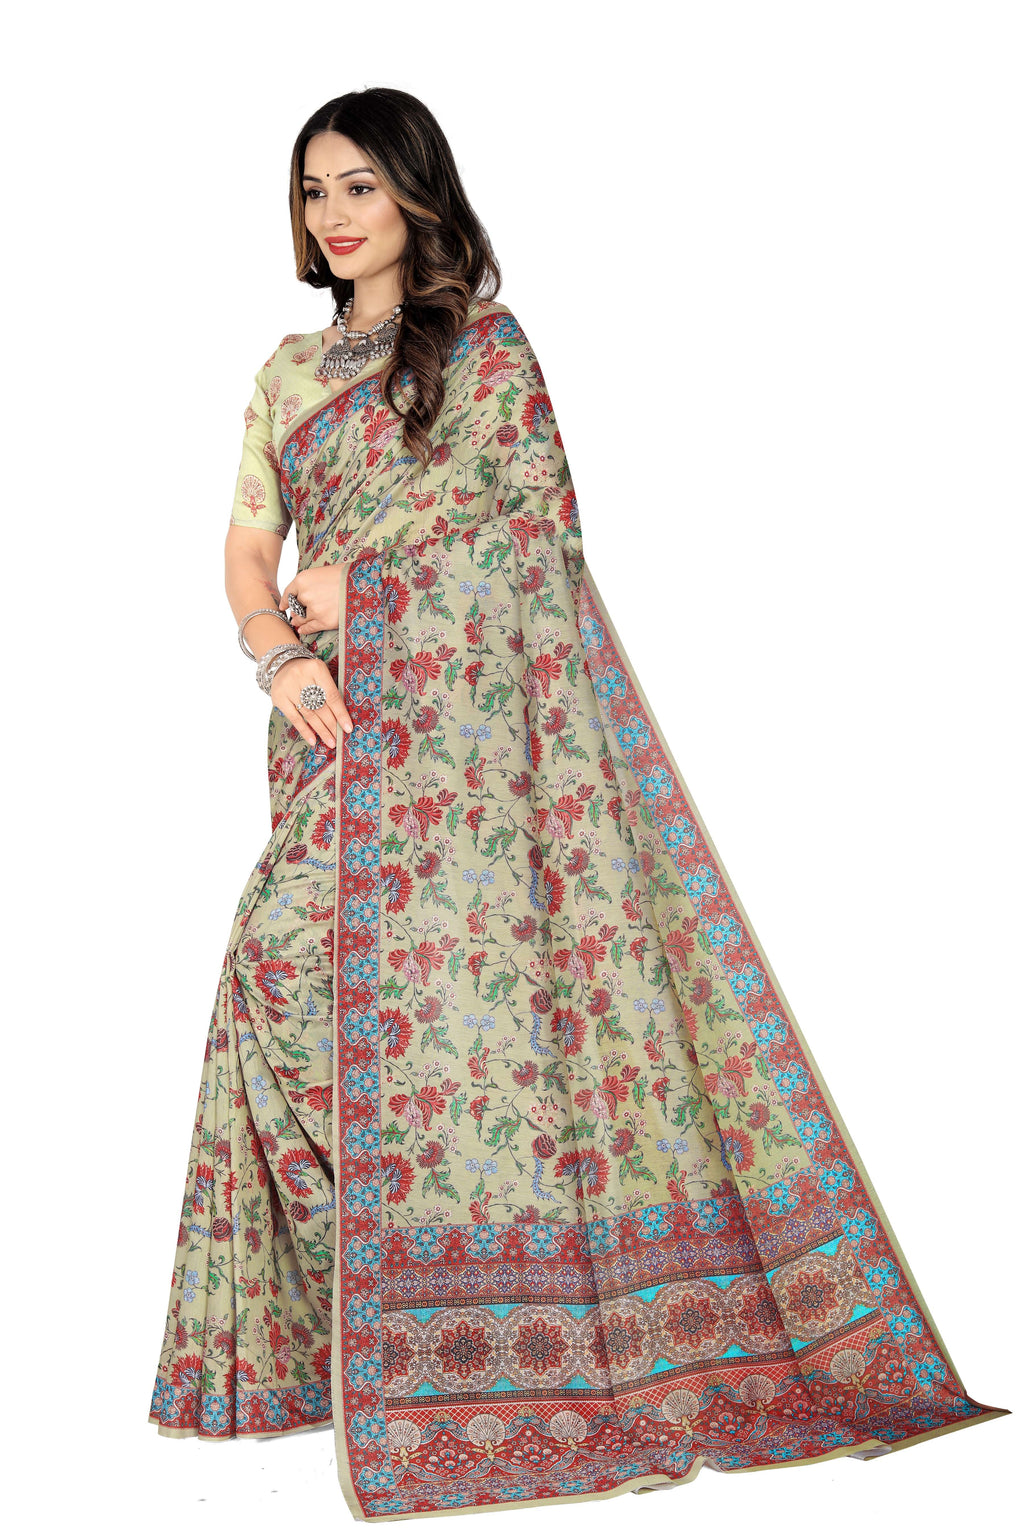 Madhumeena Women Cotton Silk Digital Printed Saree With Unstitched Blouse